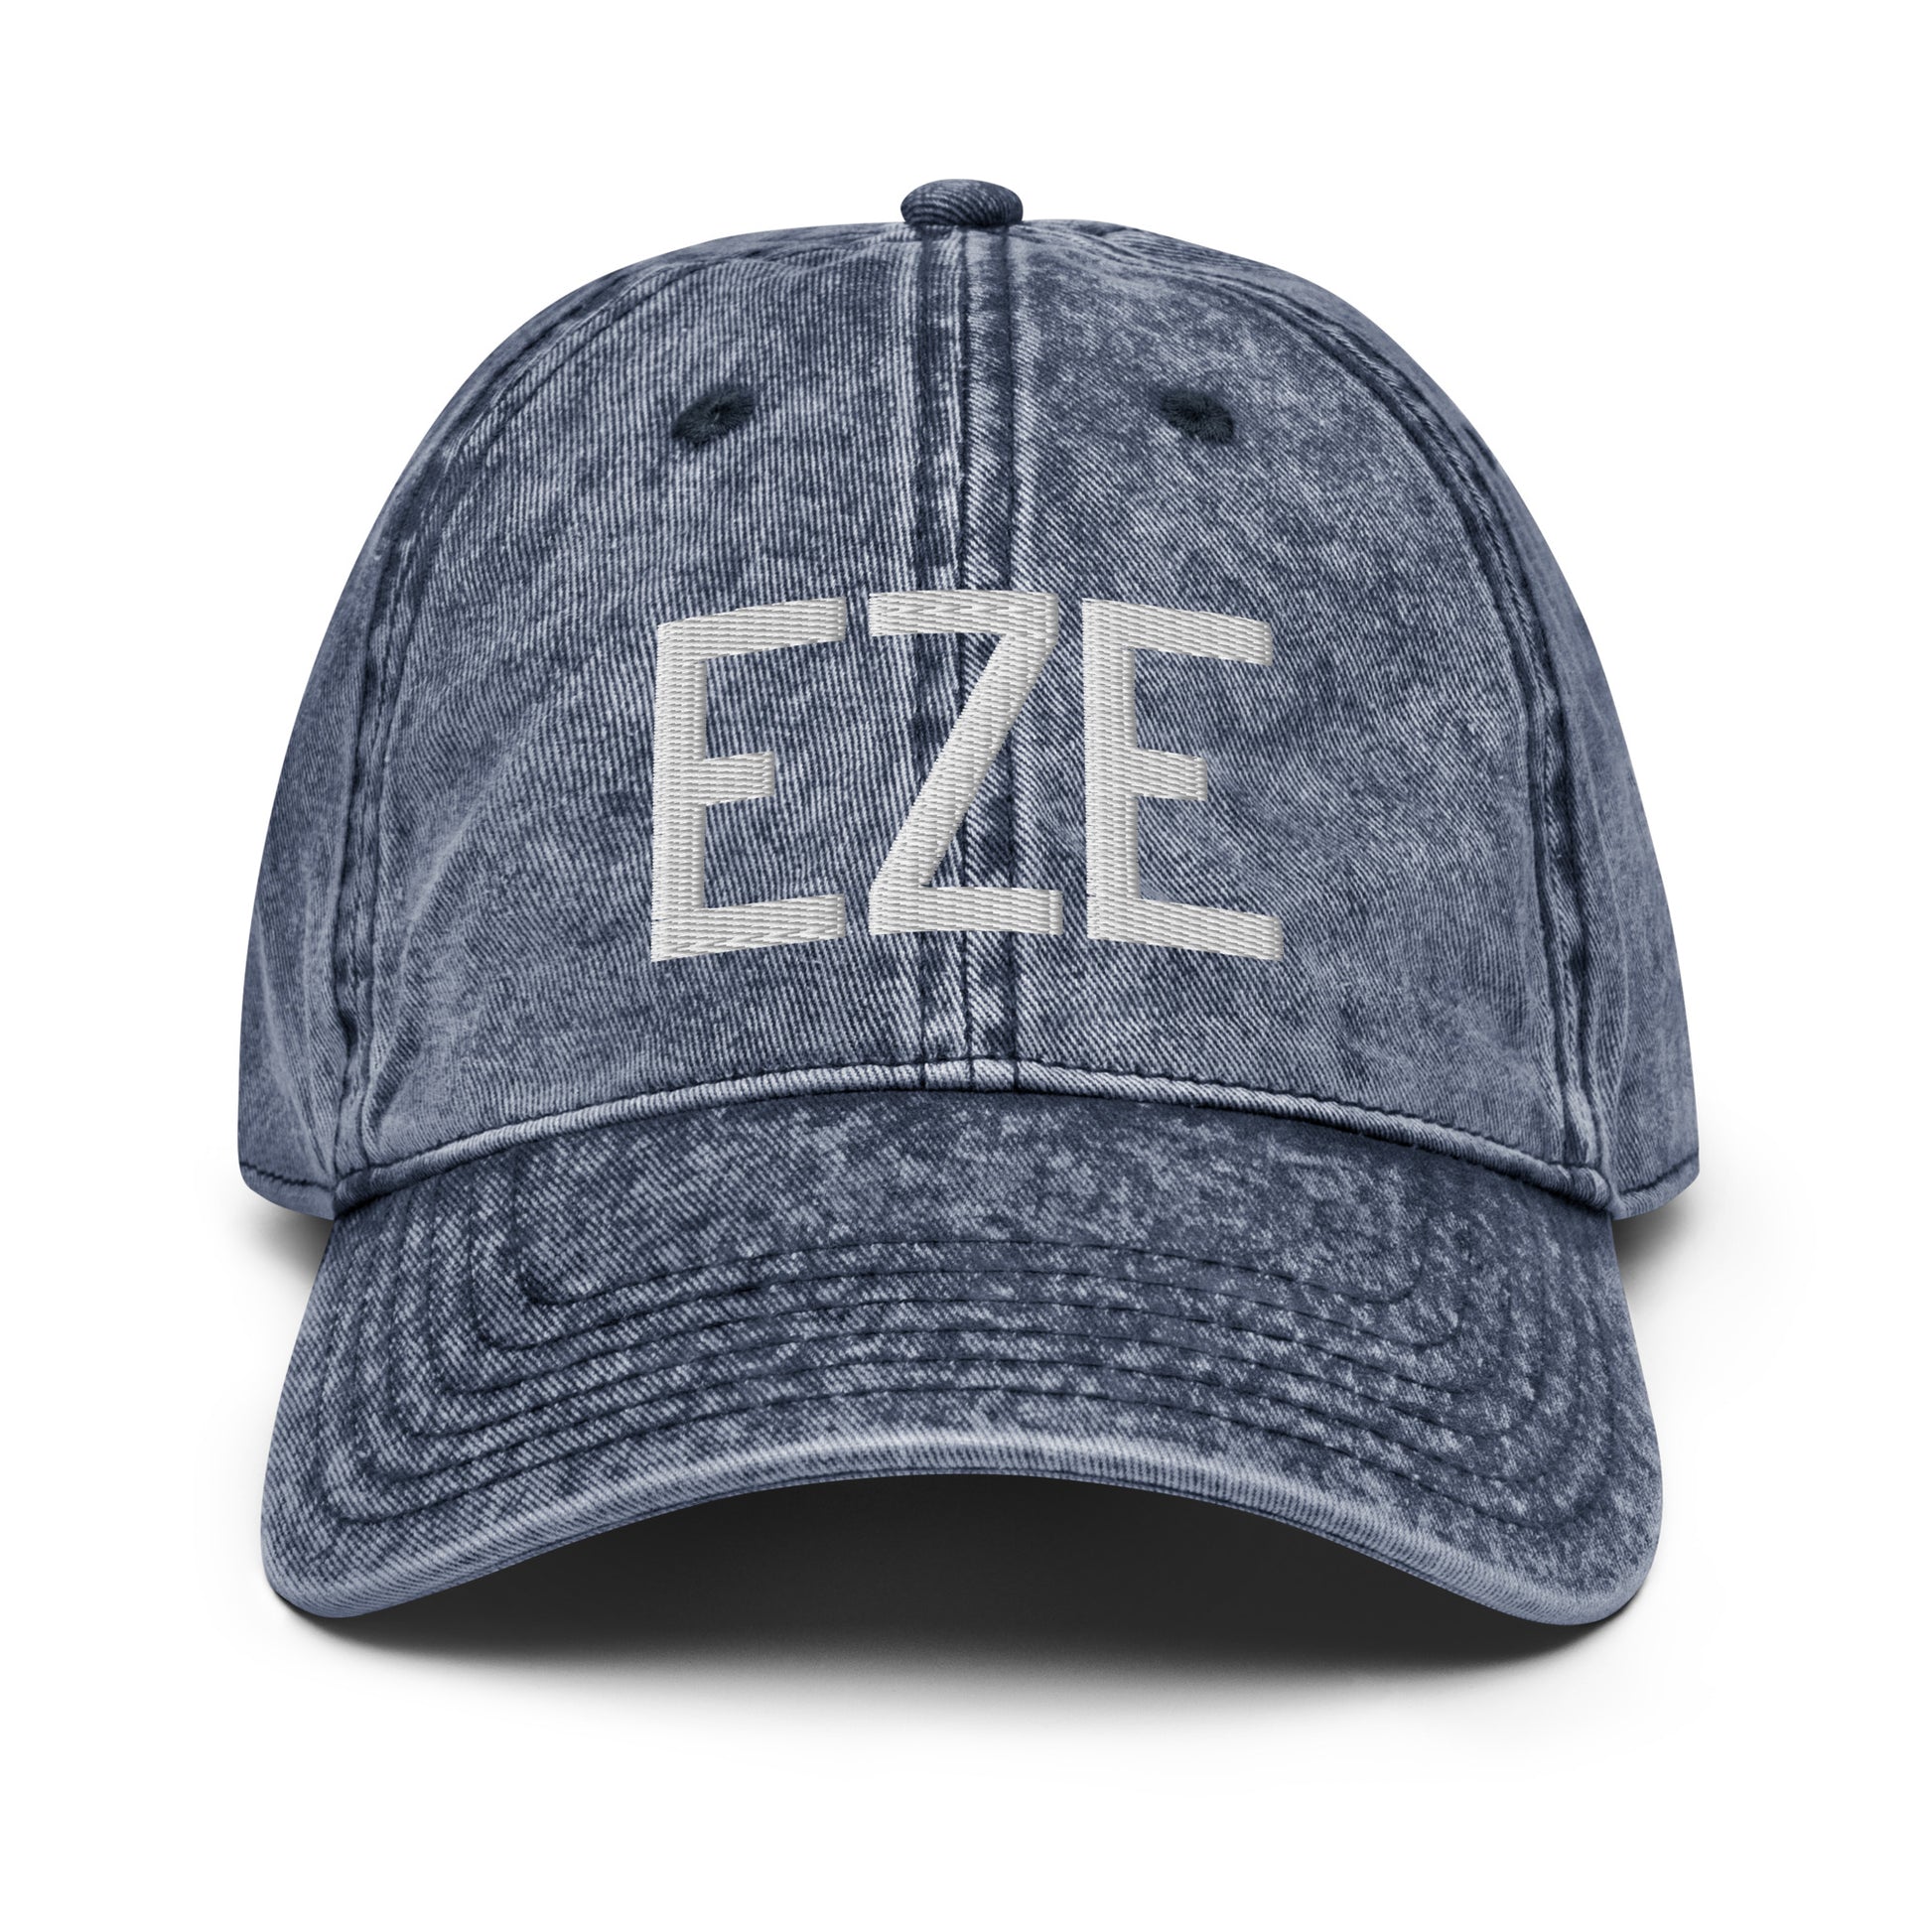 Airport Code Twill Cap - White • EZE Buenos Aires • YHM Designs - Image 16